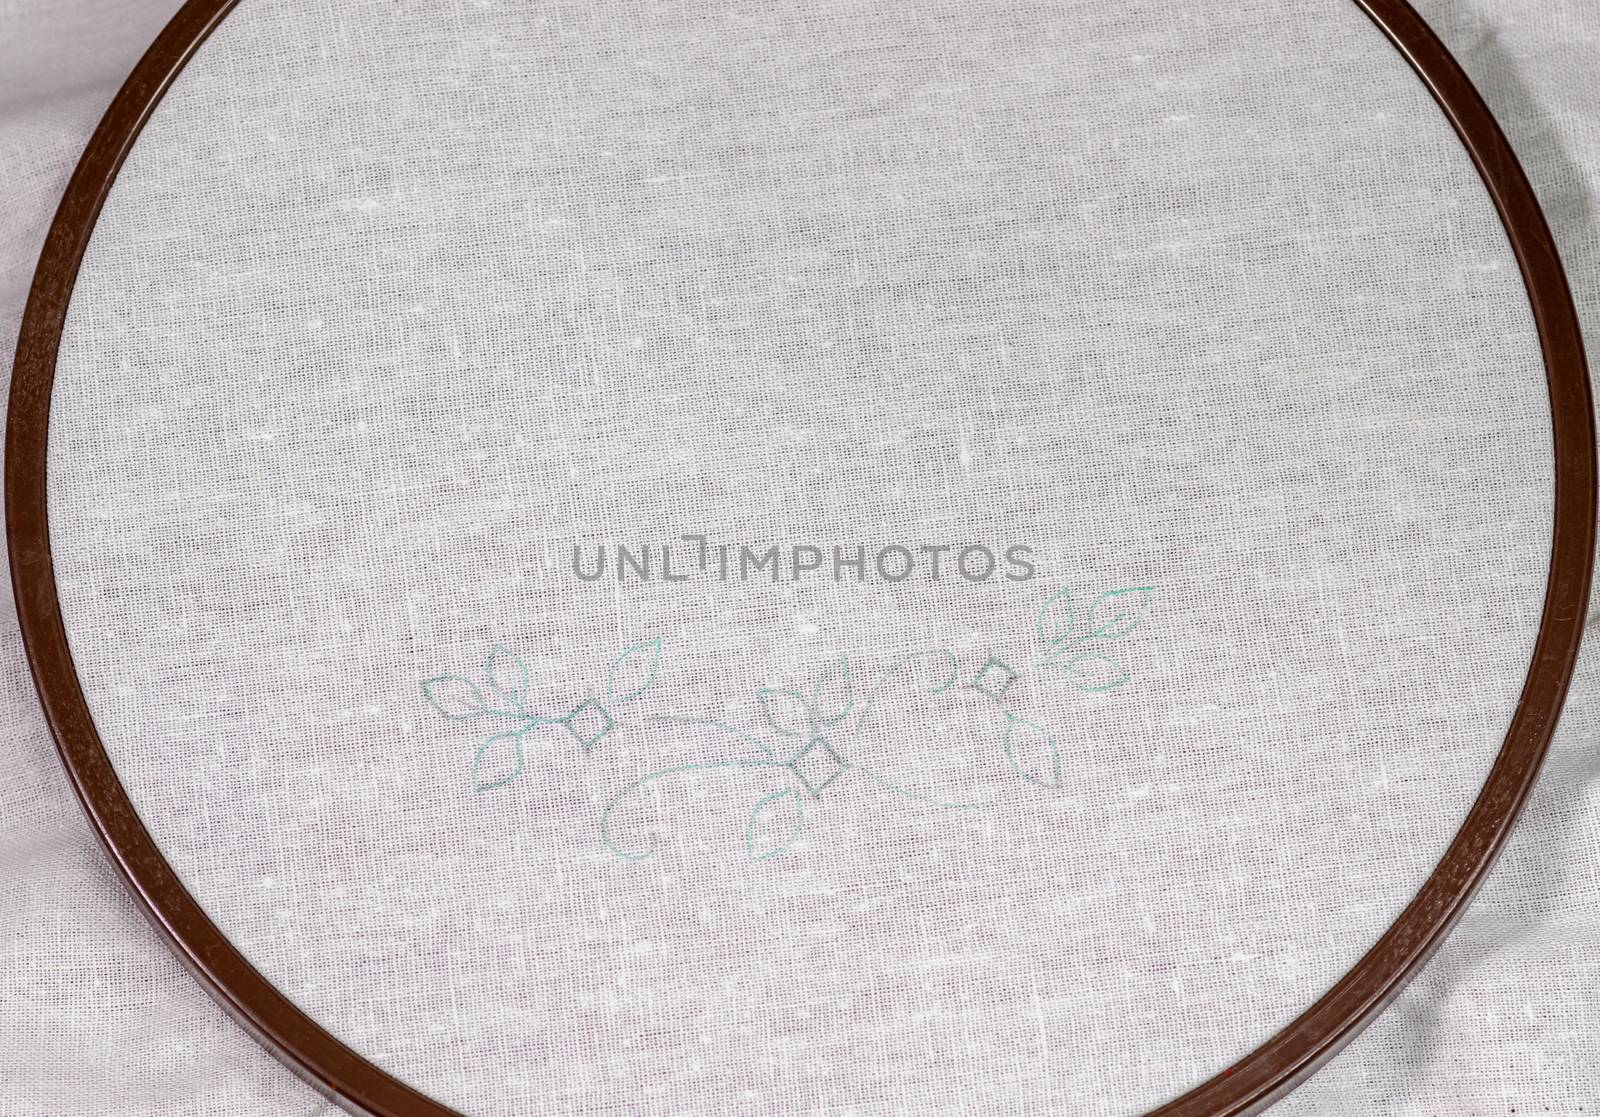 Wooden Embroidery hoop with a clean white piece of linen cloth and a simple design.